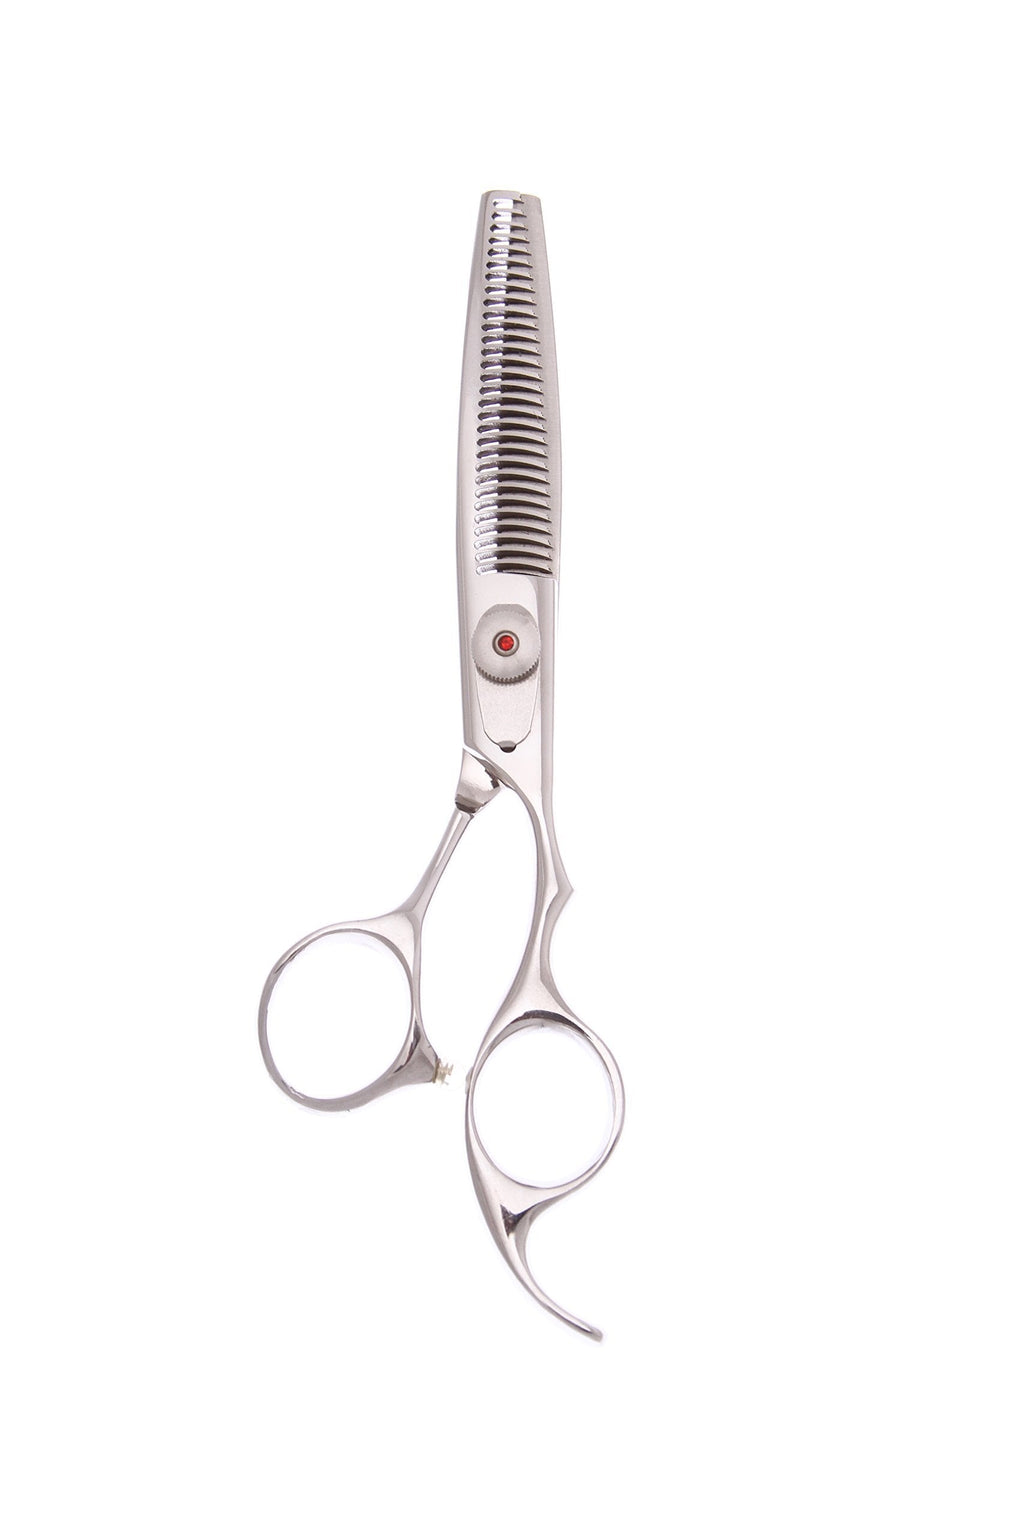 [Australia] - ShearsDirect PL10-30T Japanese Stainless Steel 30 Tooth Texturizing Shear, 6" 